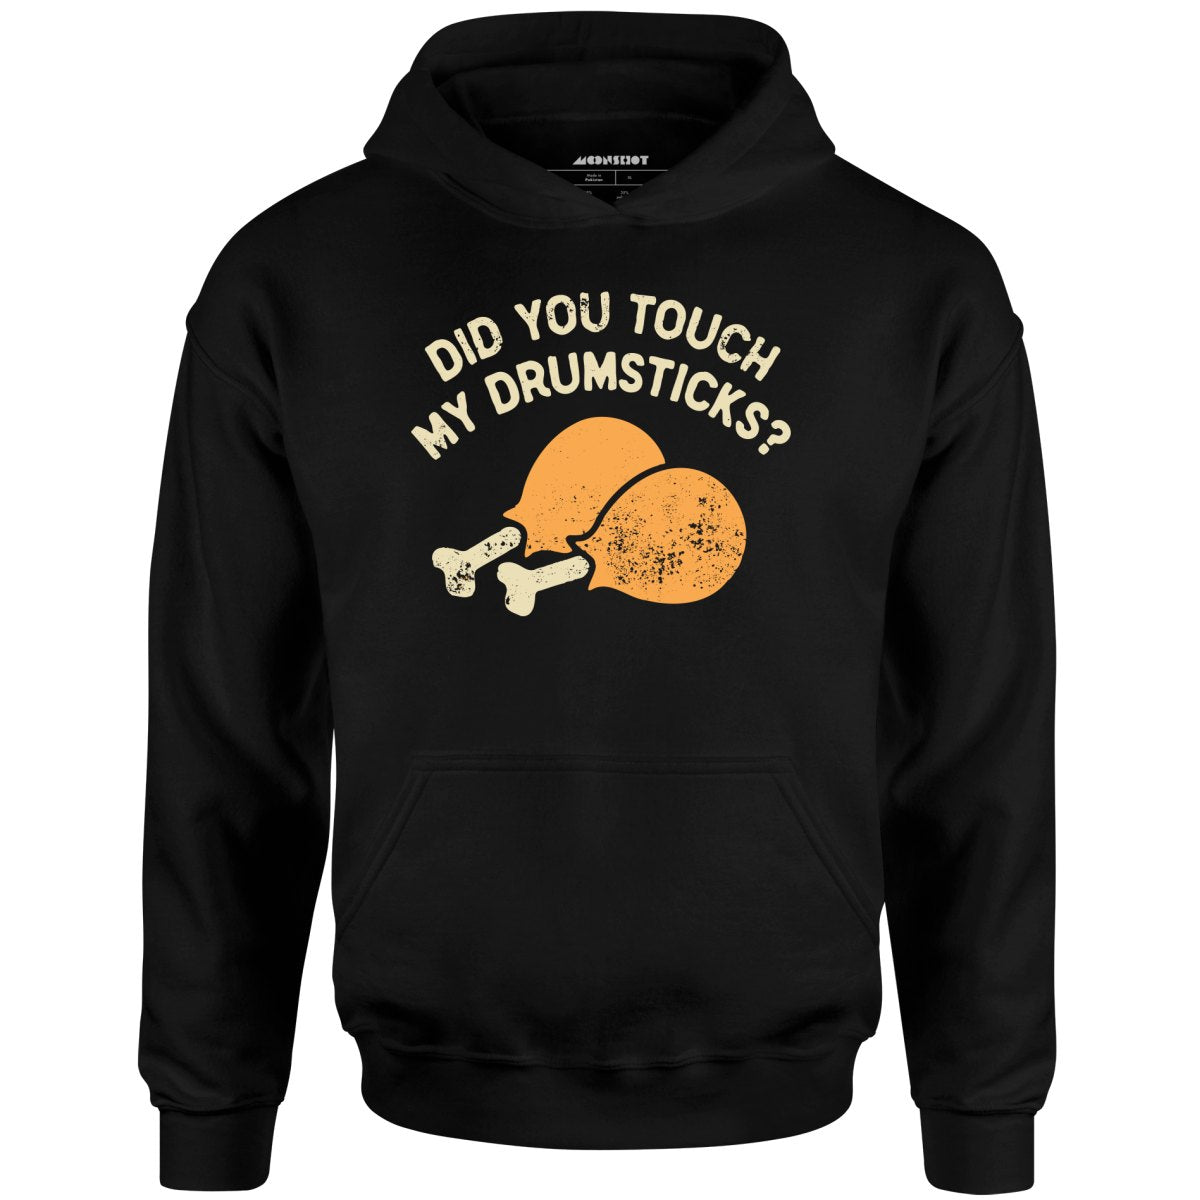 Did You Touch My Drumsticks? - Unisex Hoodie